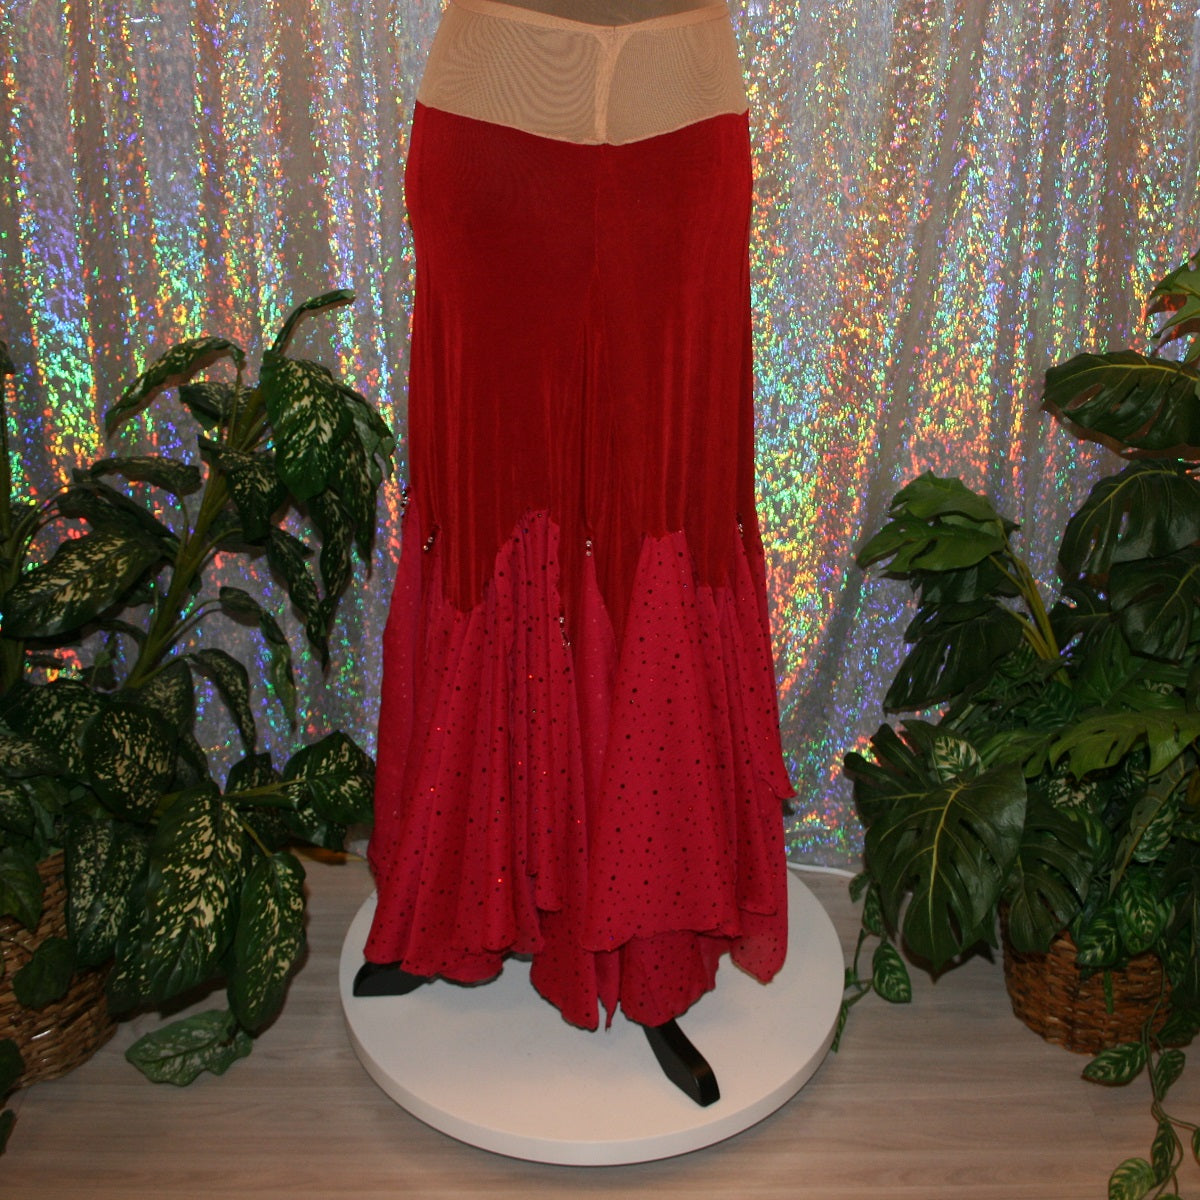 back view of Scarlet red ballroom dance skirt created of luxurious scarlet red solid slinky with insets & floats of scarlet red champagne sequined chiffon with a touch of Swarovski hand beading.